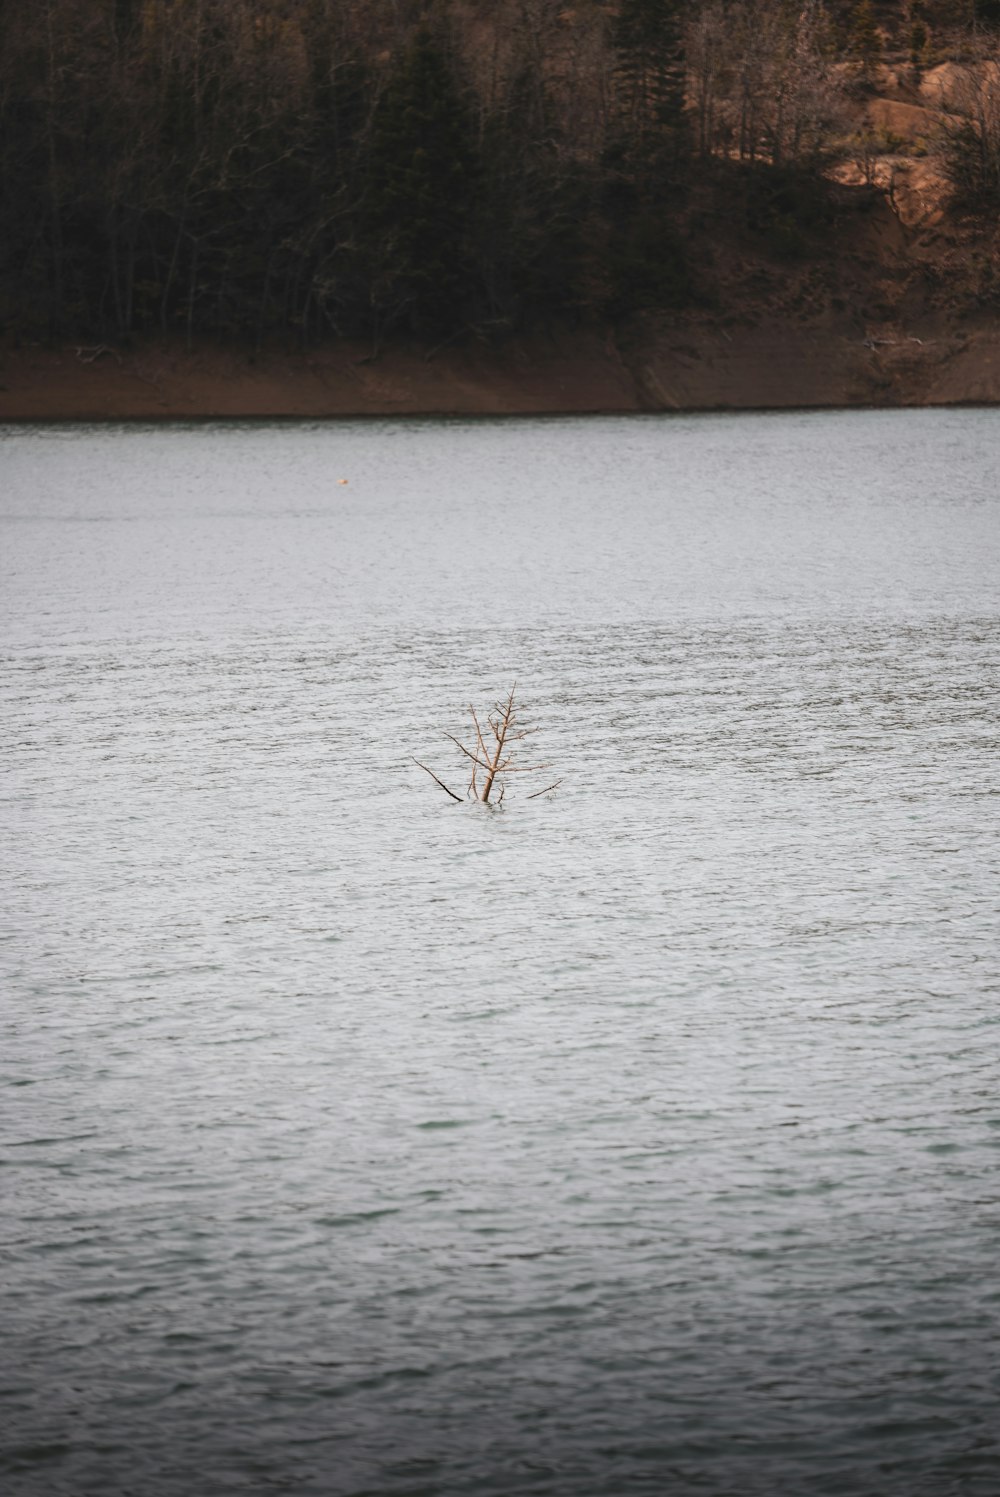 a lone tree in the middle of a lake